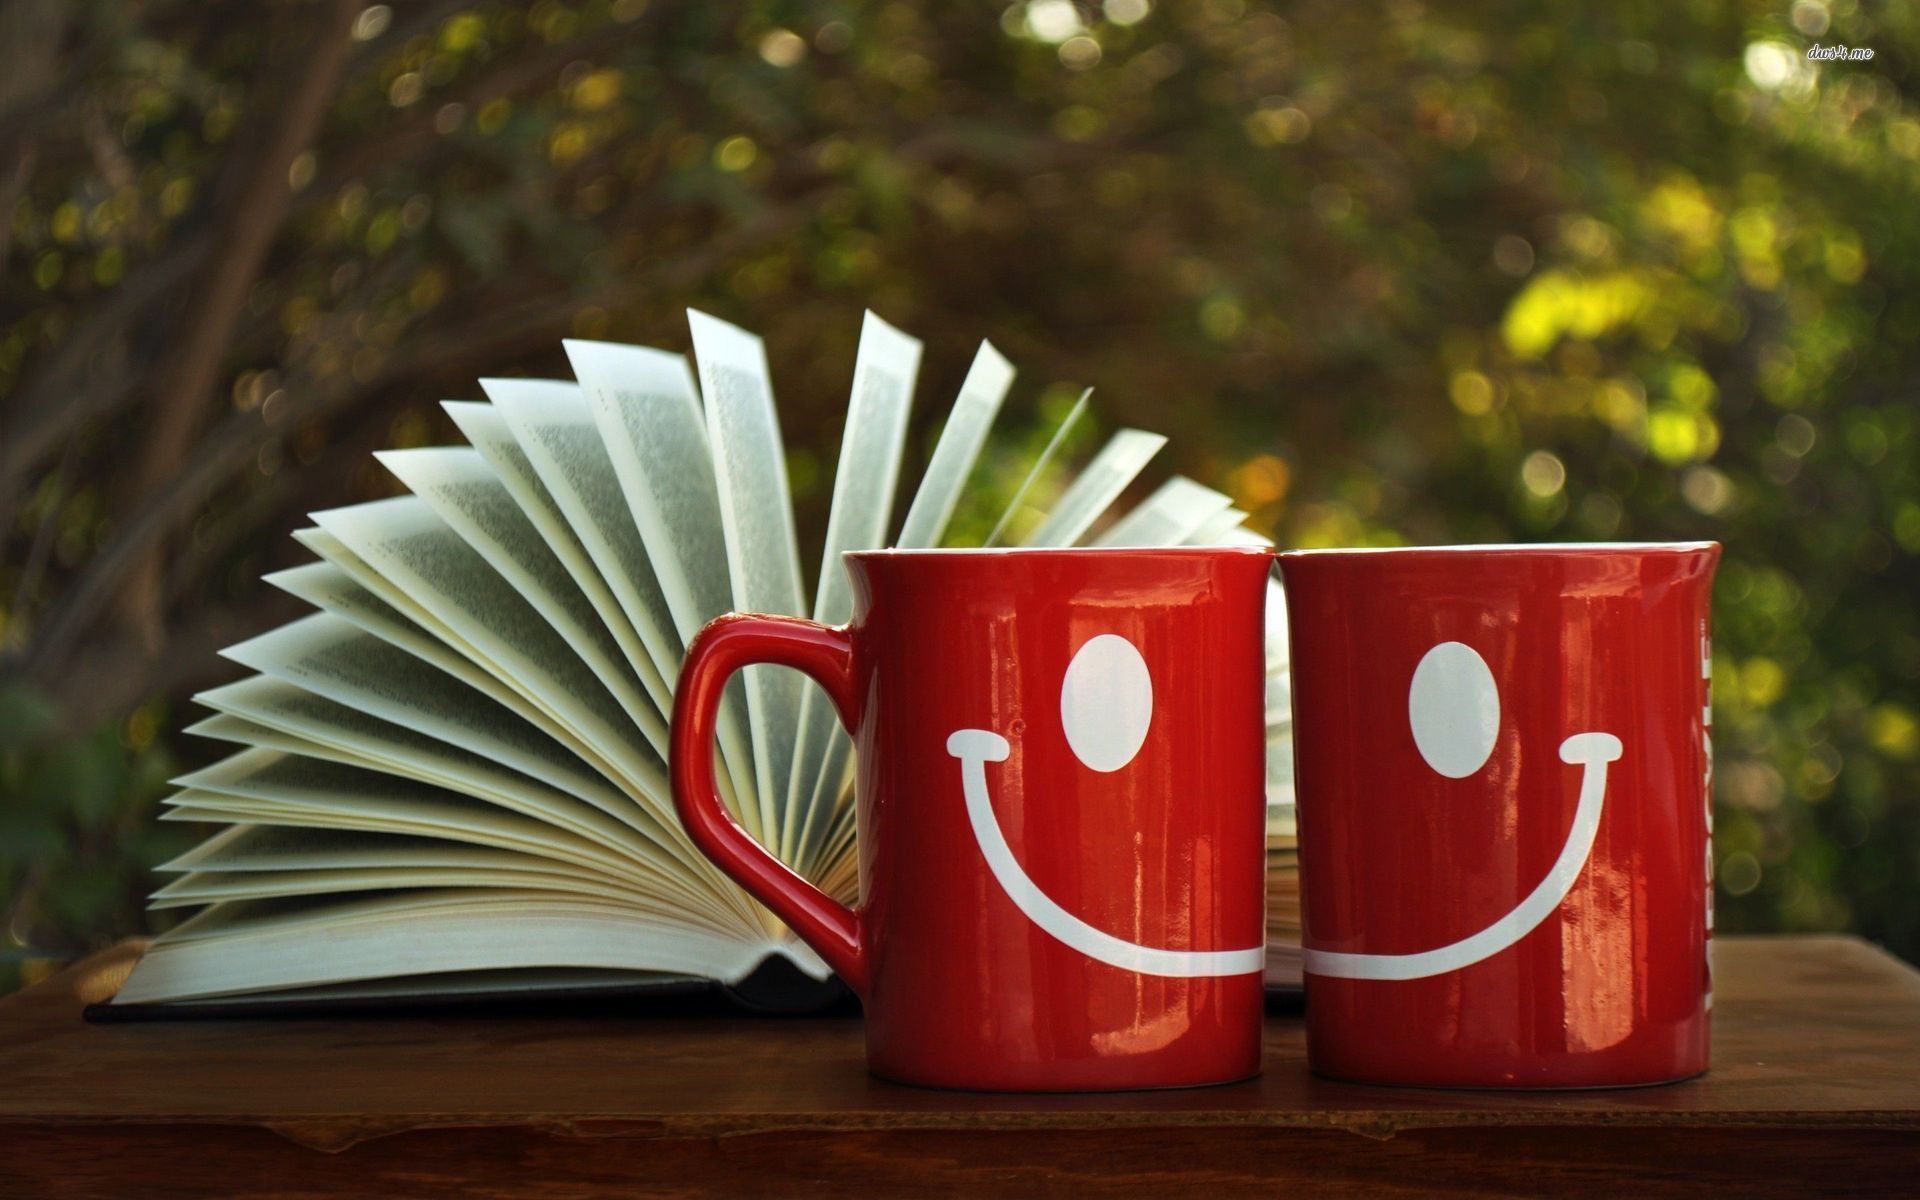 Happy mugs and an open book wallpaper - Photography wallpapers ...